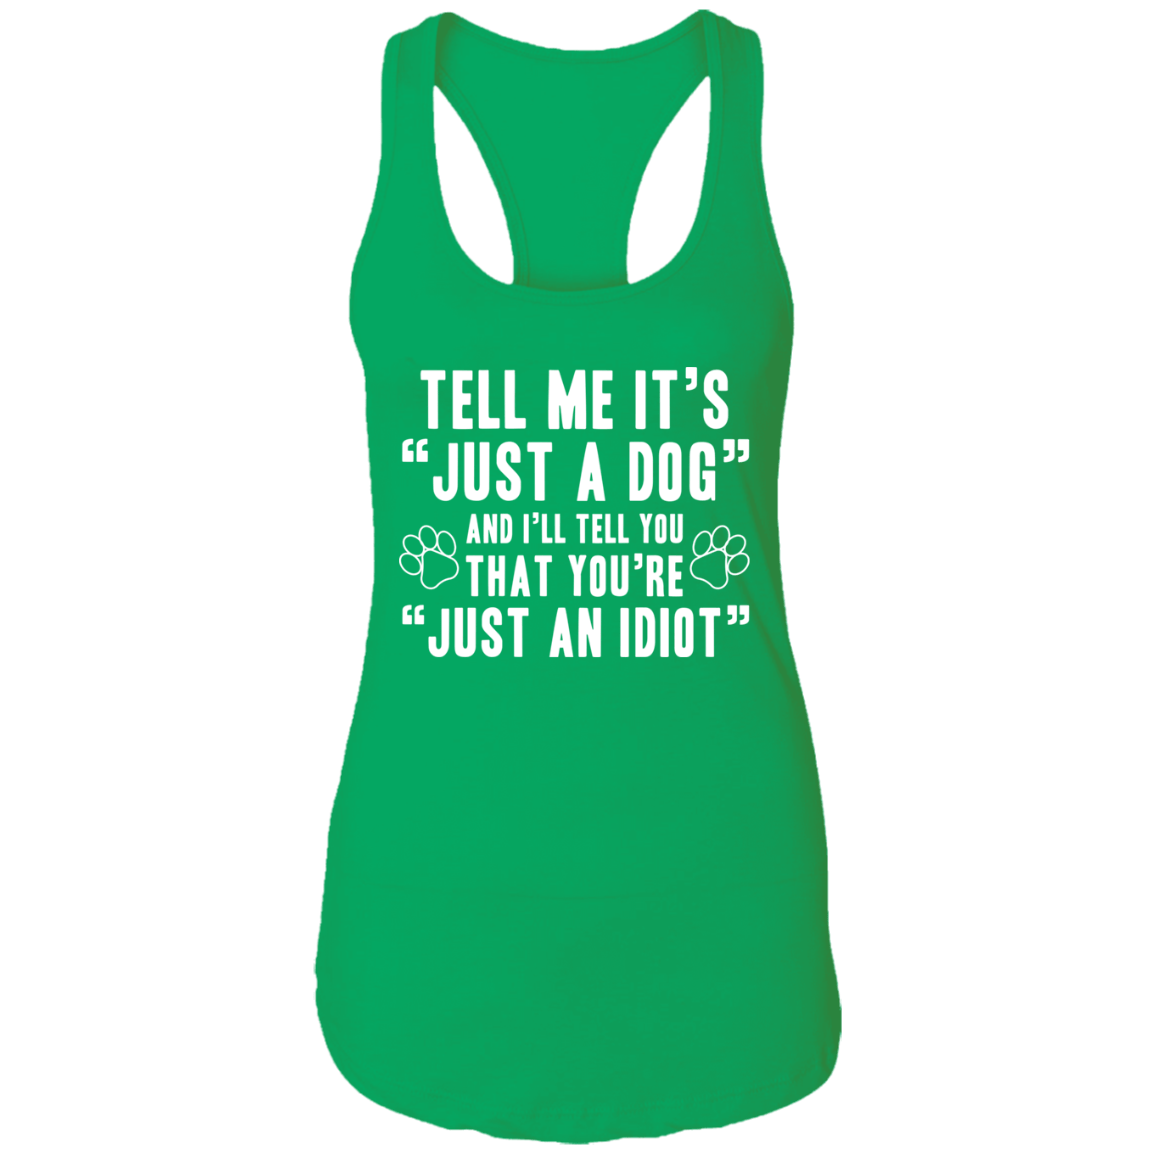 Tell Me It's Just A Dog - Ladies Racer Back Tank.